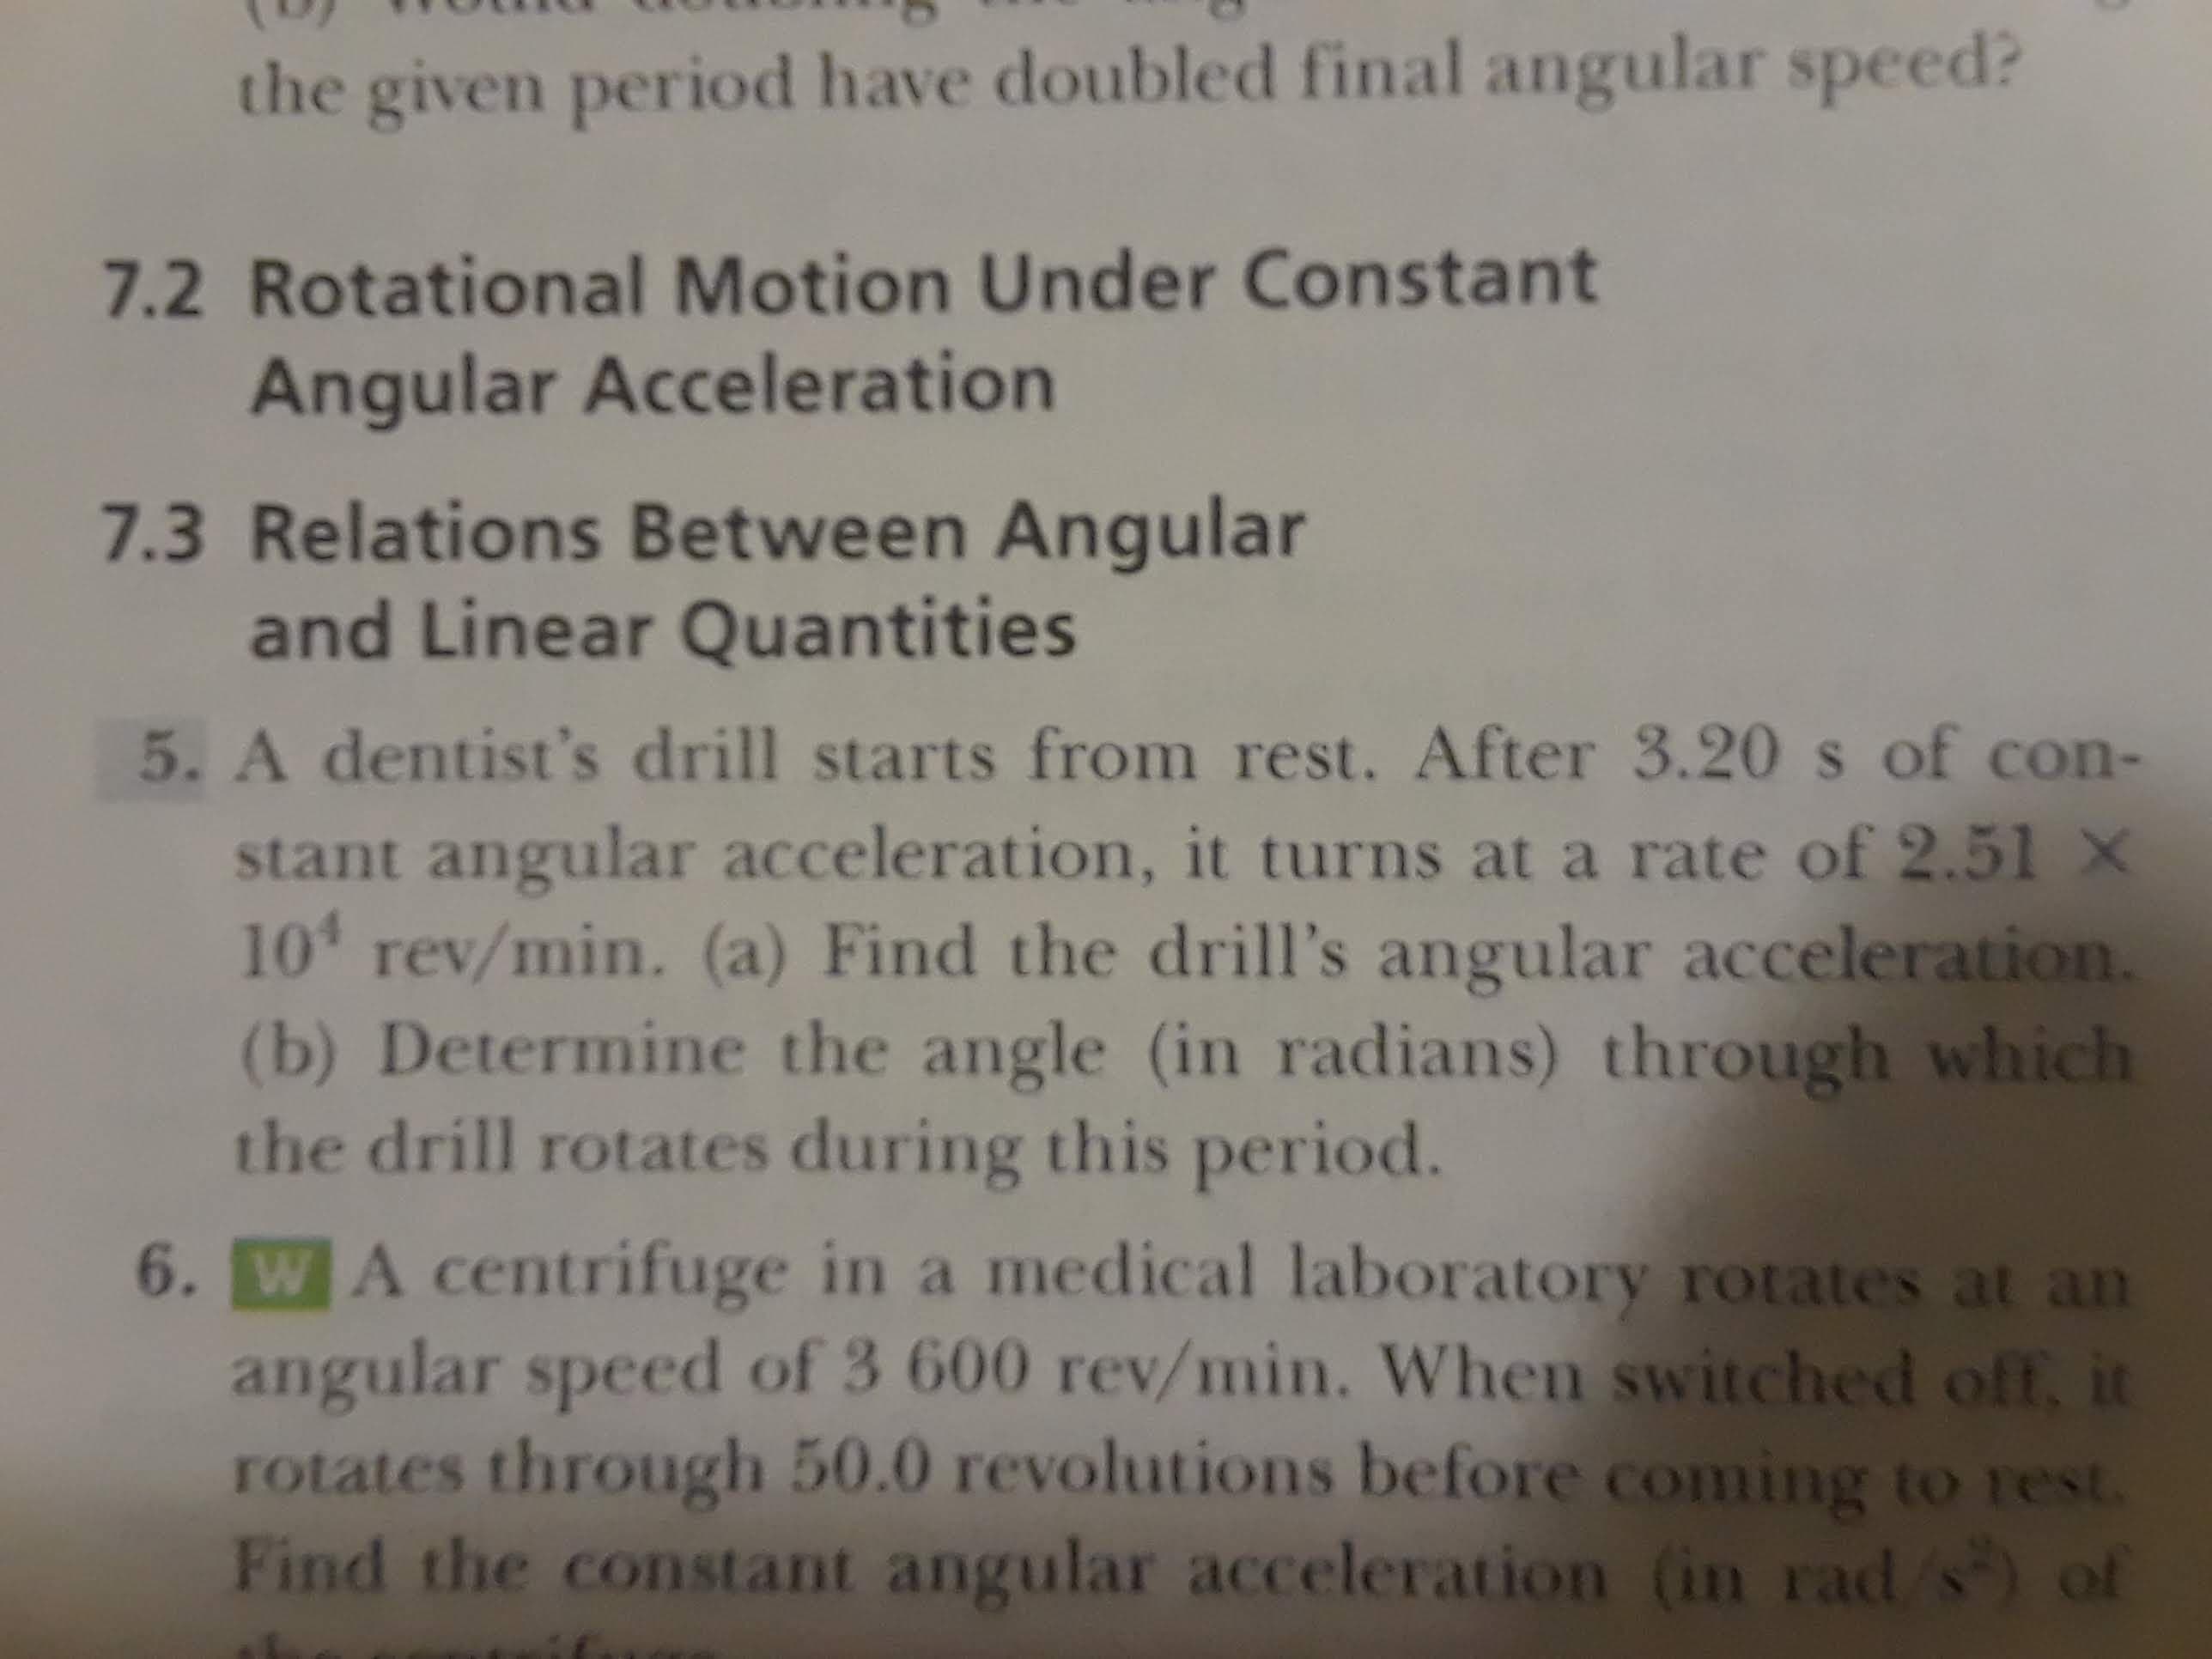 the given period have doubled final angular speed?
7.2 Rotational Motion Under Constant
Angular Acceleration
7.3 Relations Between Angular
and Linear Quantities
5. A dentist's drill starts from rest. After 3.20 s of con-
stant angular acceleration, it turns at a rate of 2.51 X
10 rev/min. (a) Find the drill's angular acceleration.
(b) Determine the angle (in radians) through which
the drill rotates during this period.
6. WA centrifuge in a medical laboratory rotates at an
angular speed of 3 600 rev/min. When switched off, it
rotates through 50.0 revolutions before coming to rest.
Find the constant angular acceleration (in rad/s of
